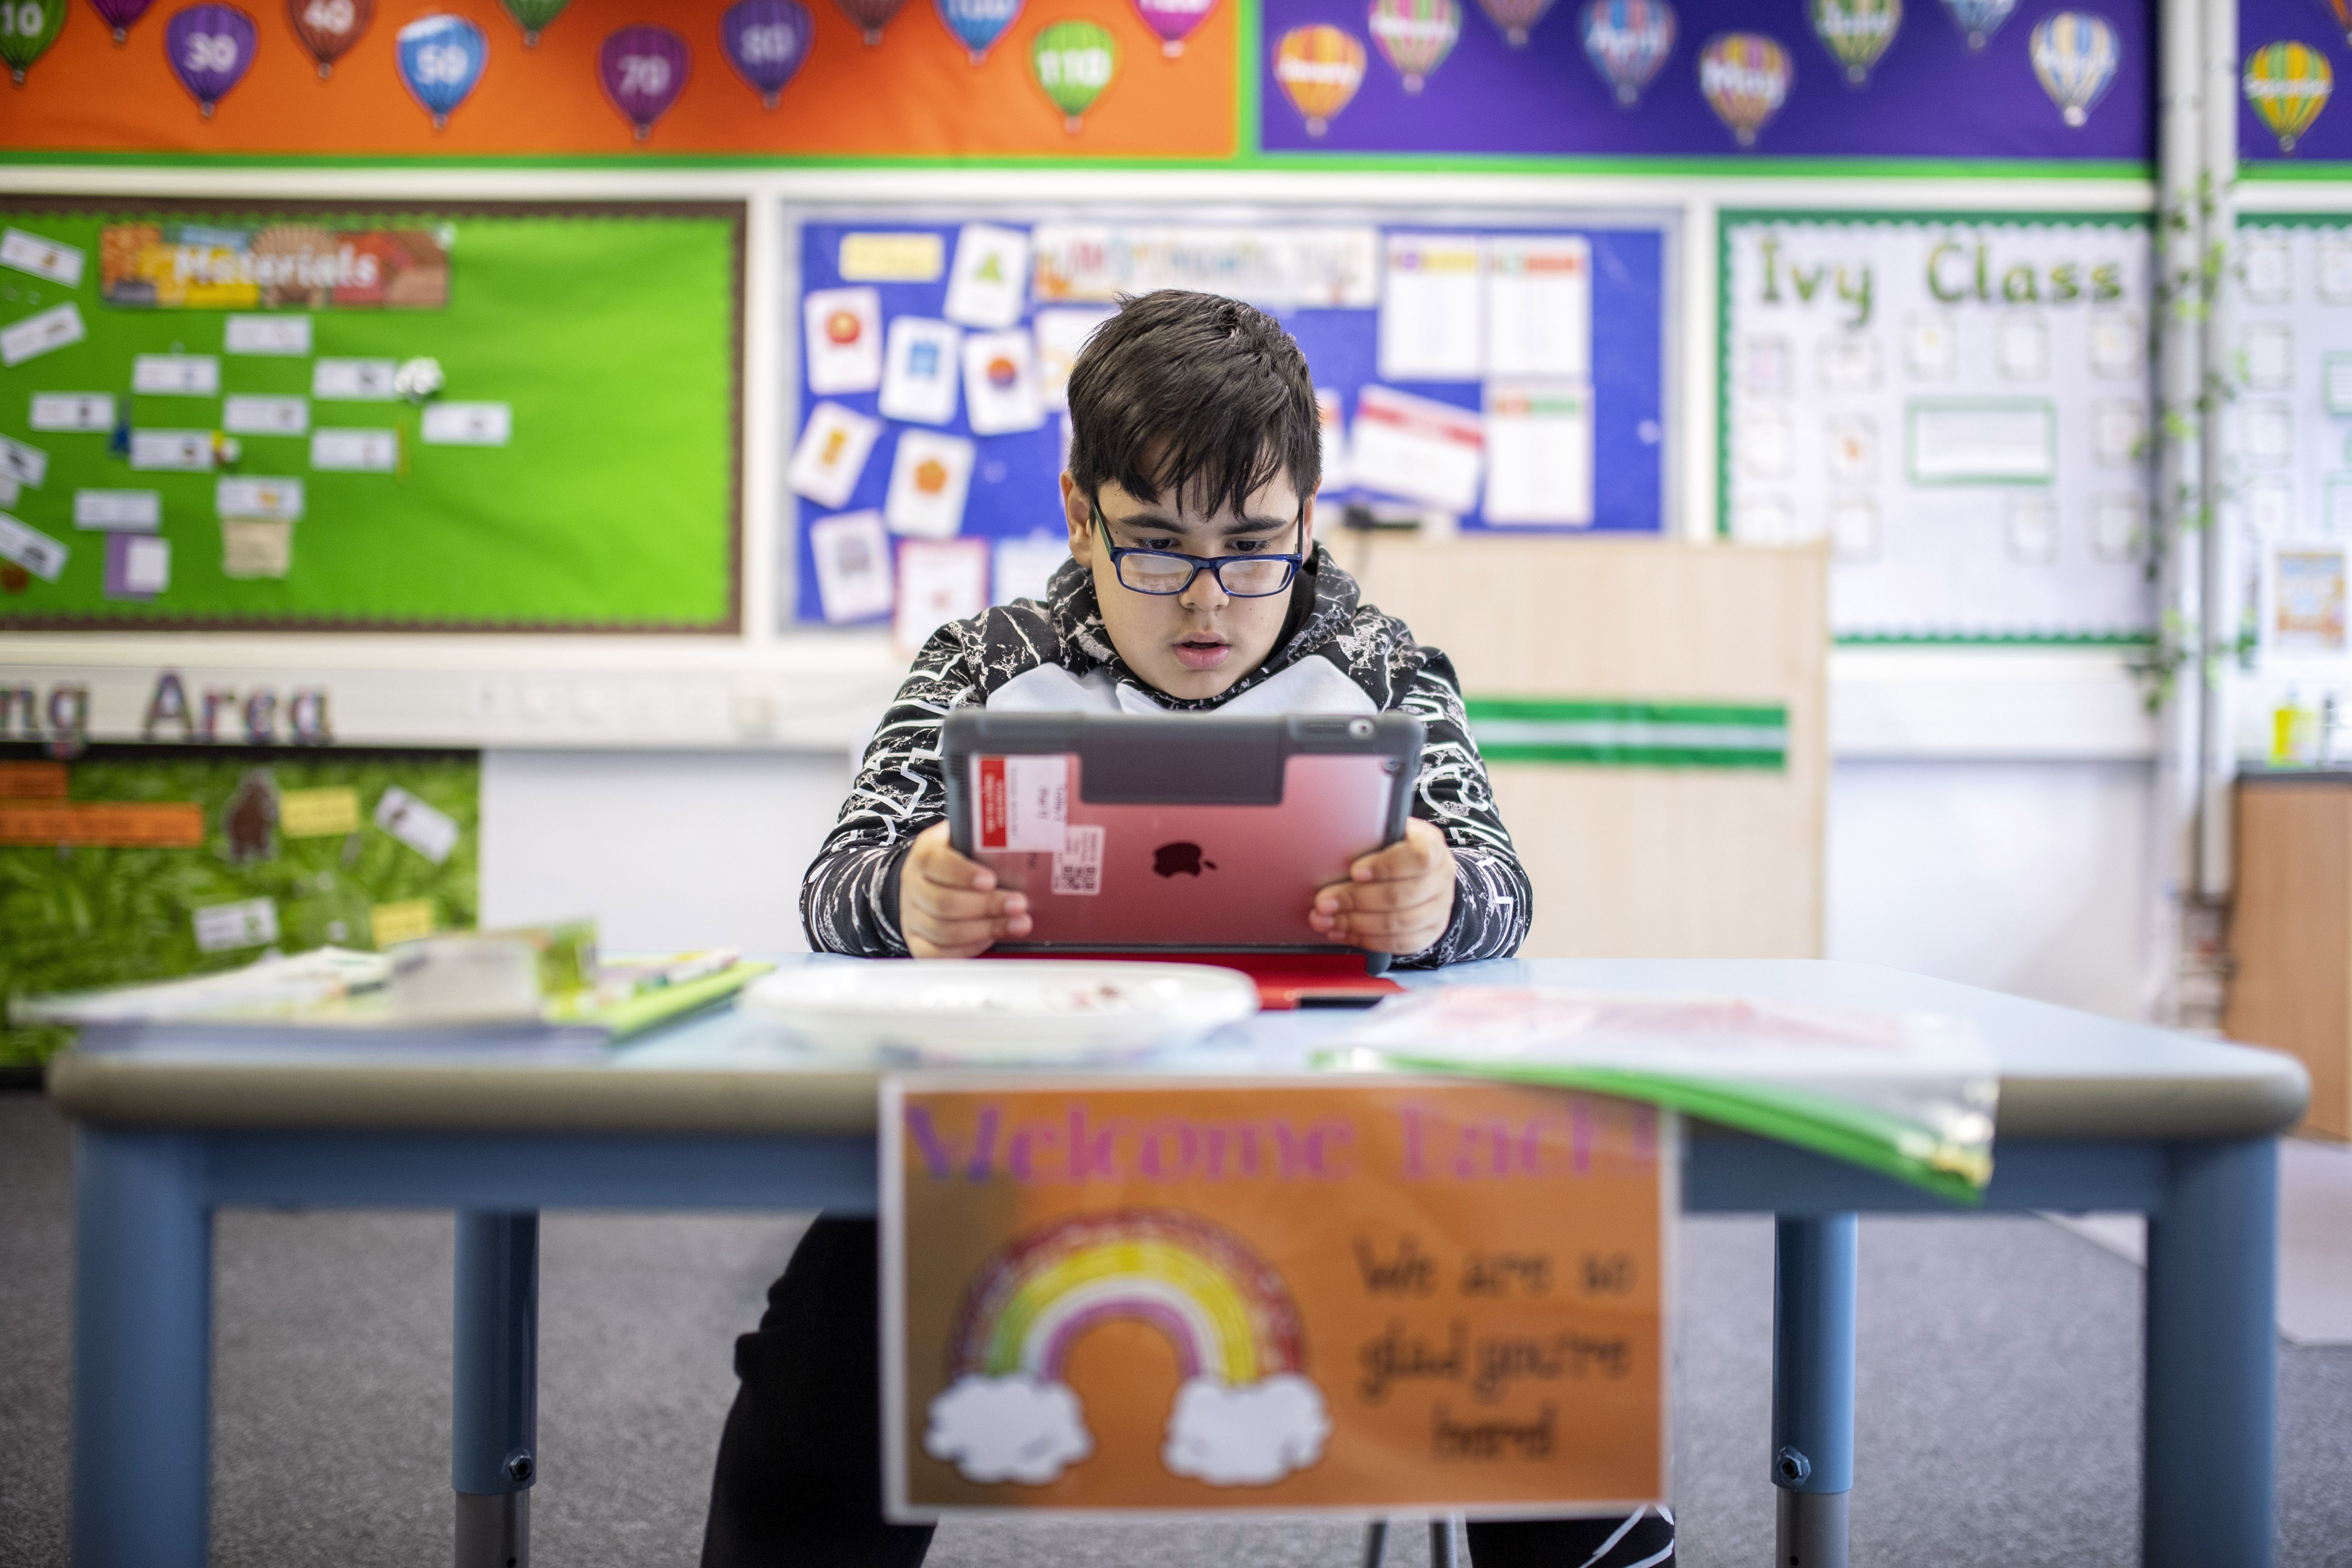 A child maintains social distancing measures while taking part in a lesson at Earlham Primary School in London, England